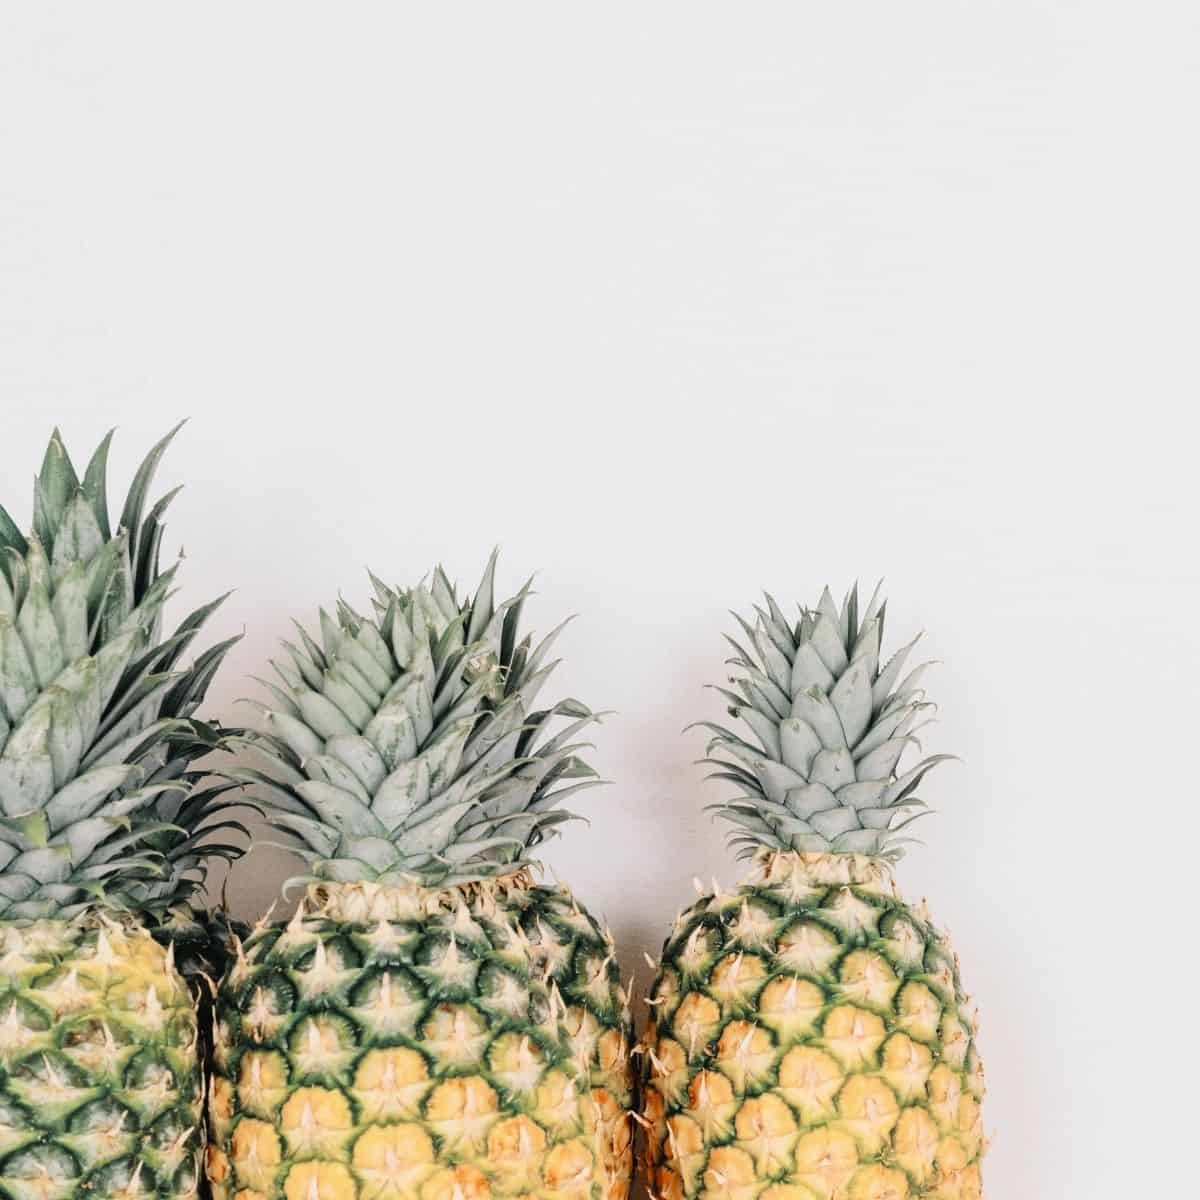 three pineapples laying side by side